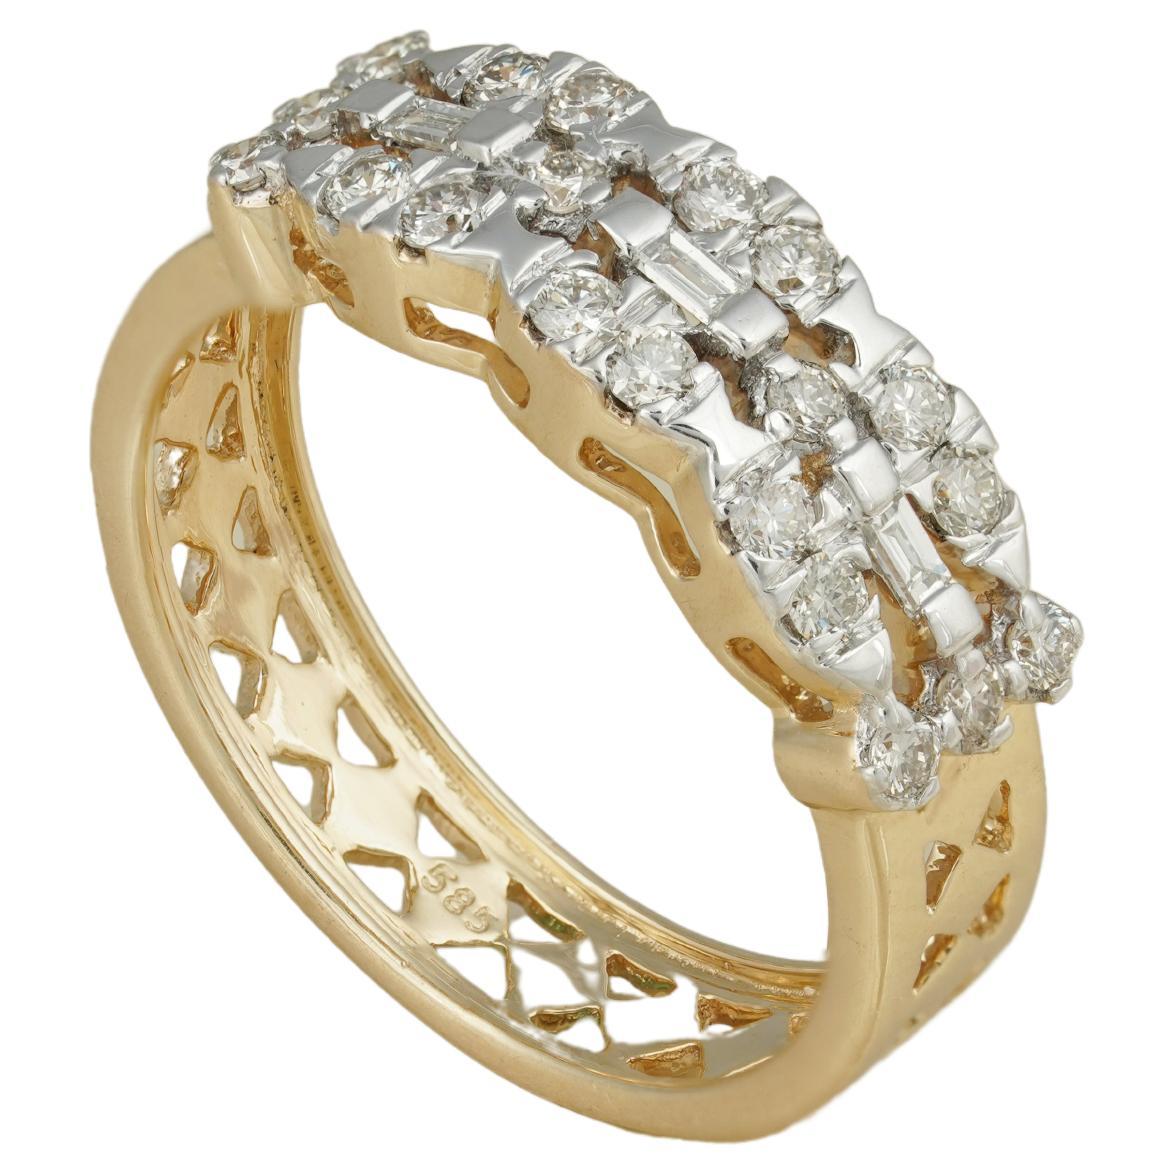 Moi Cece Baguette Diamond and Gold Ring